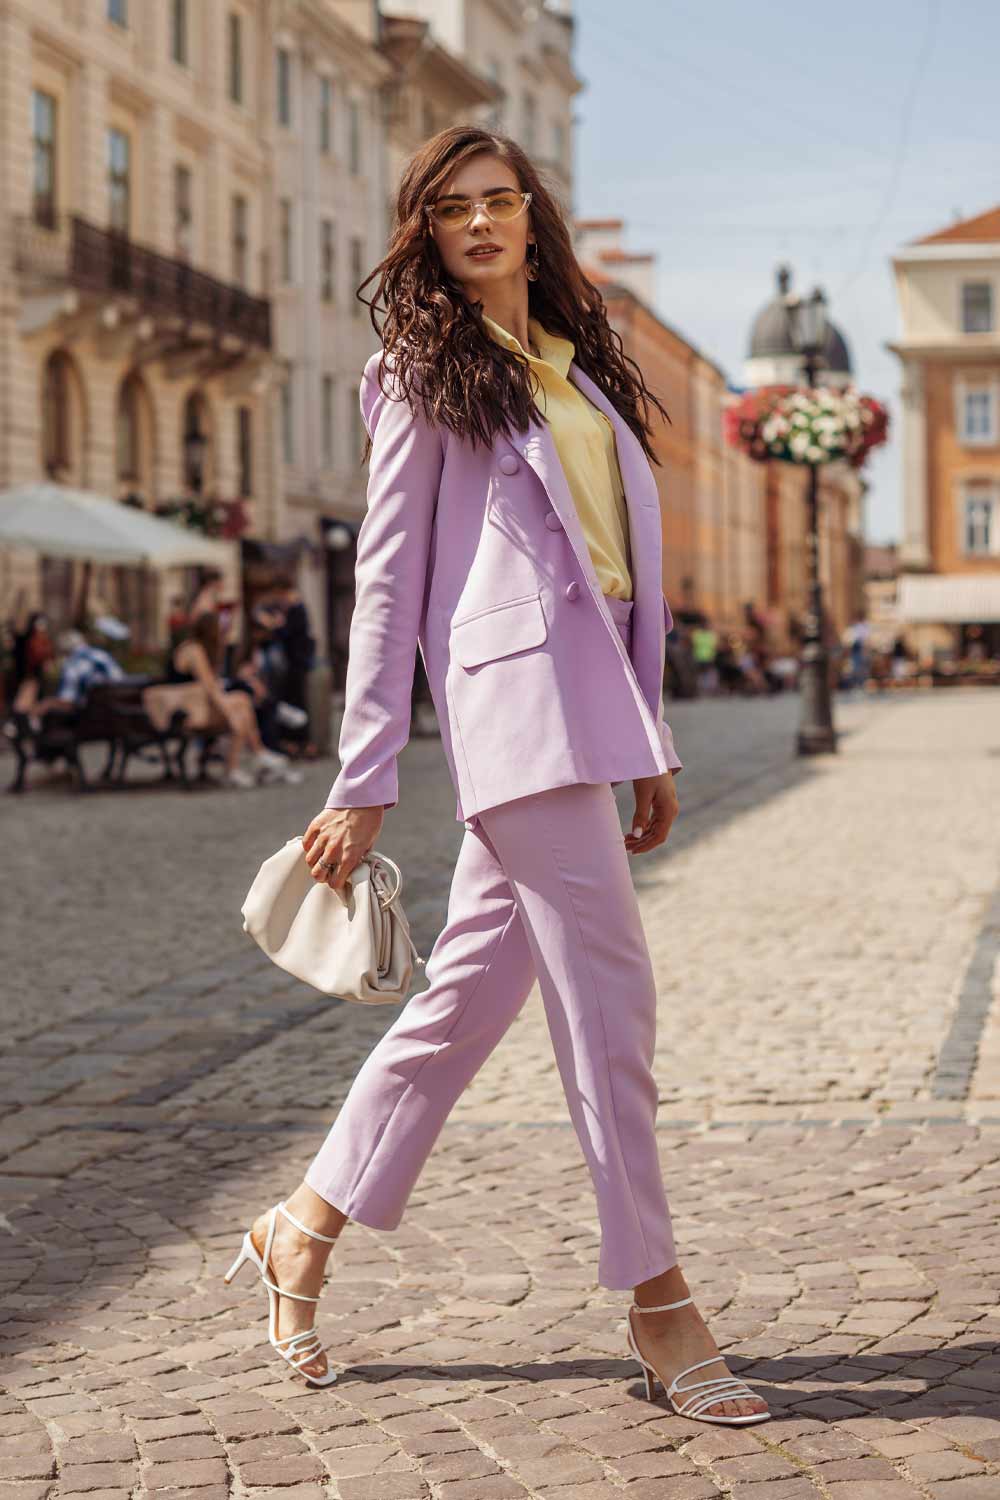 Pastel Purple Suit as Work Outfits